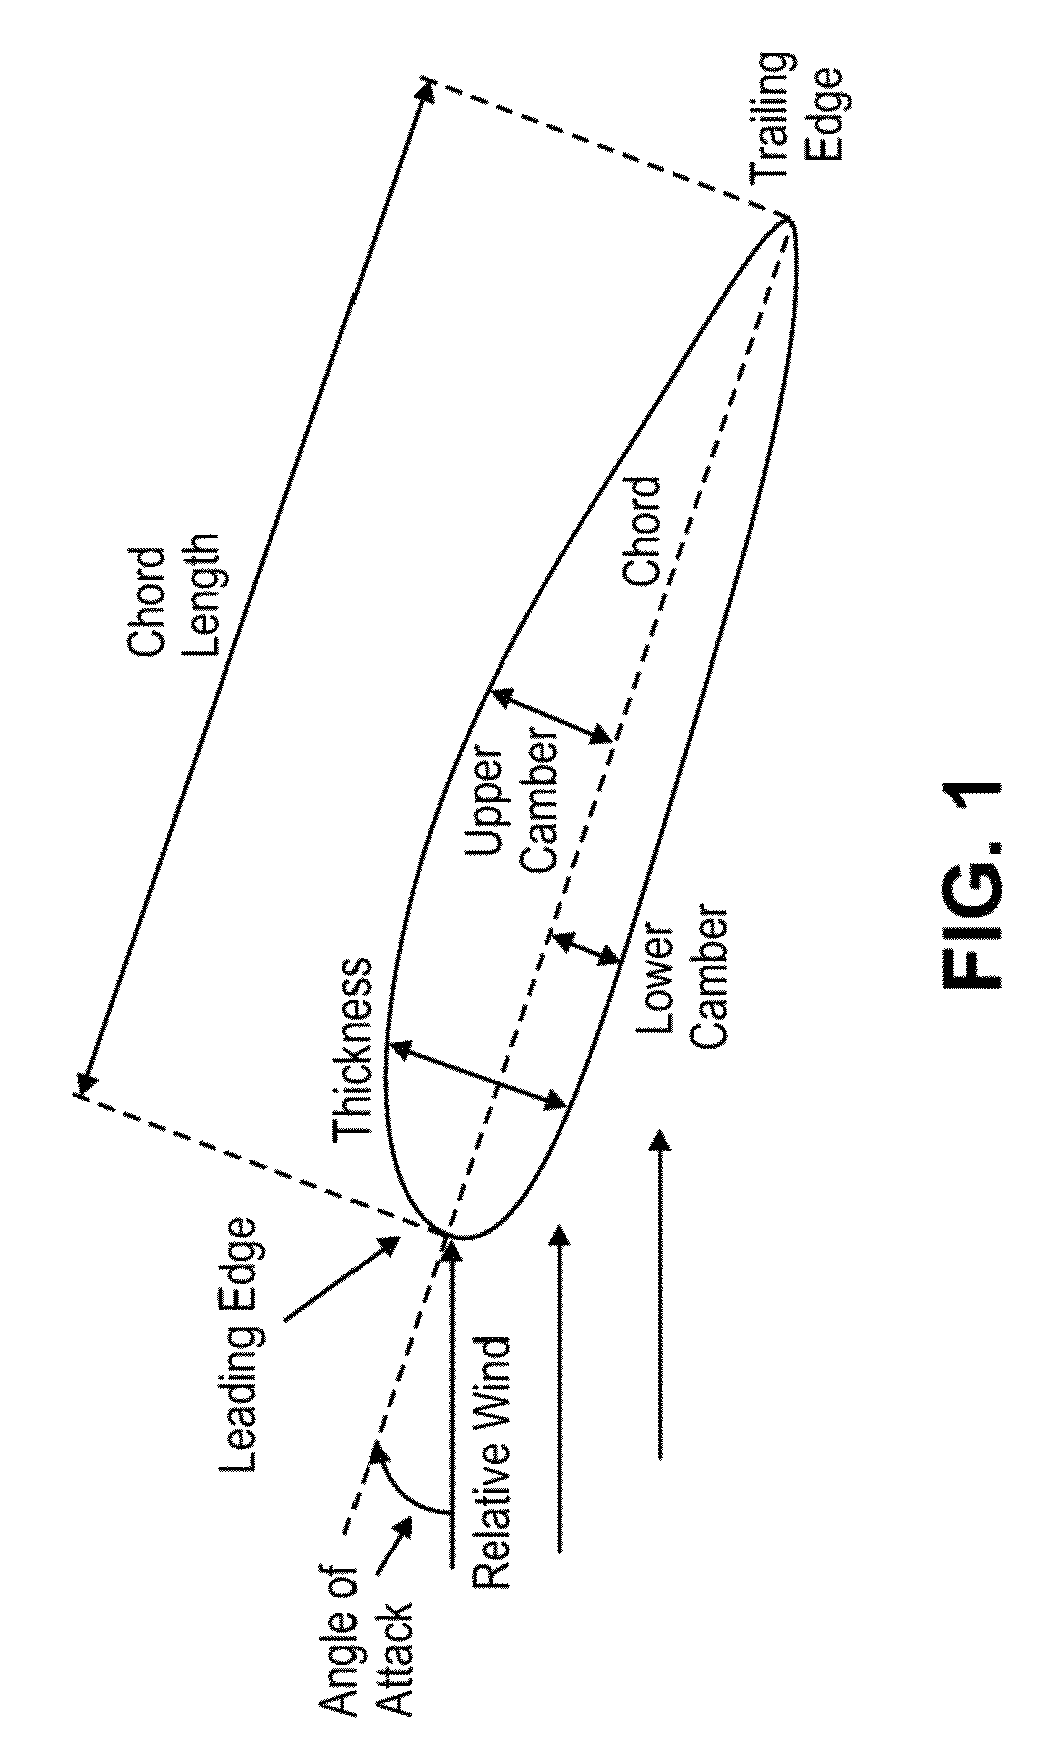 Turbine blades and systems with forward blowing slots